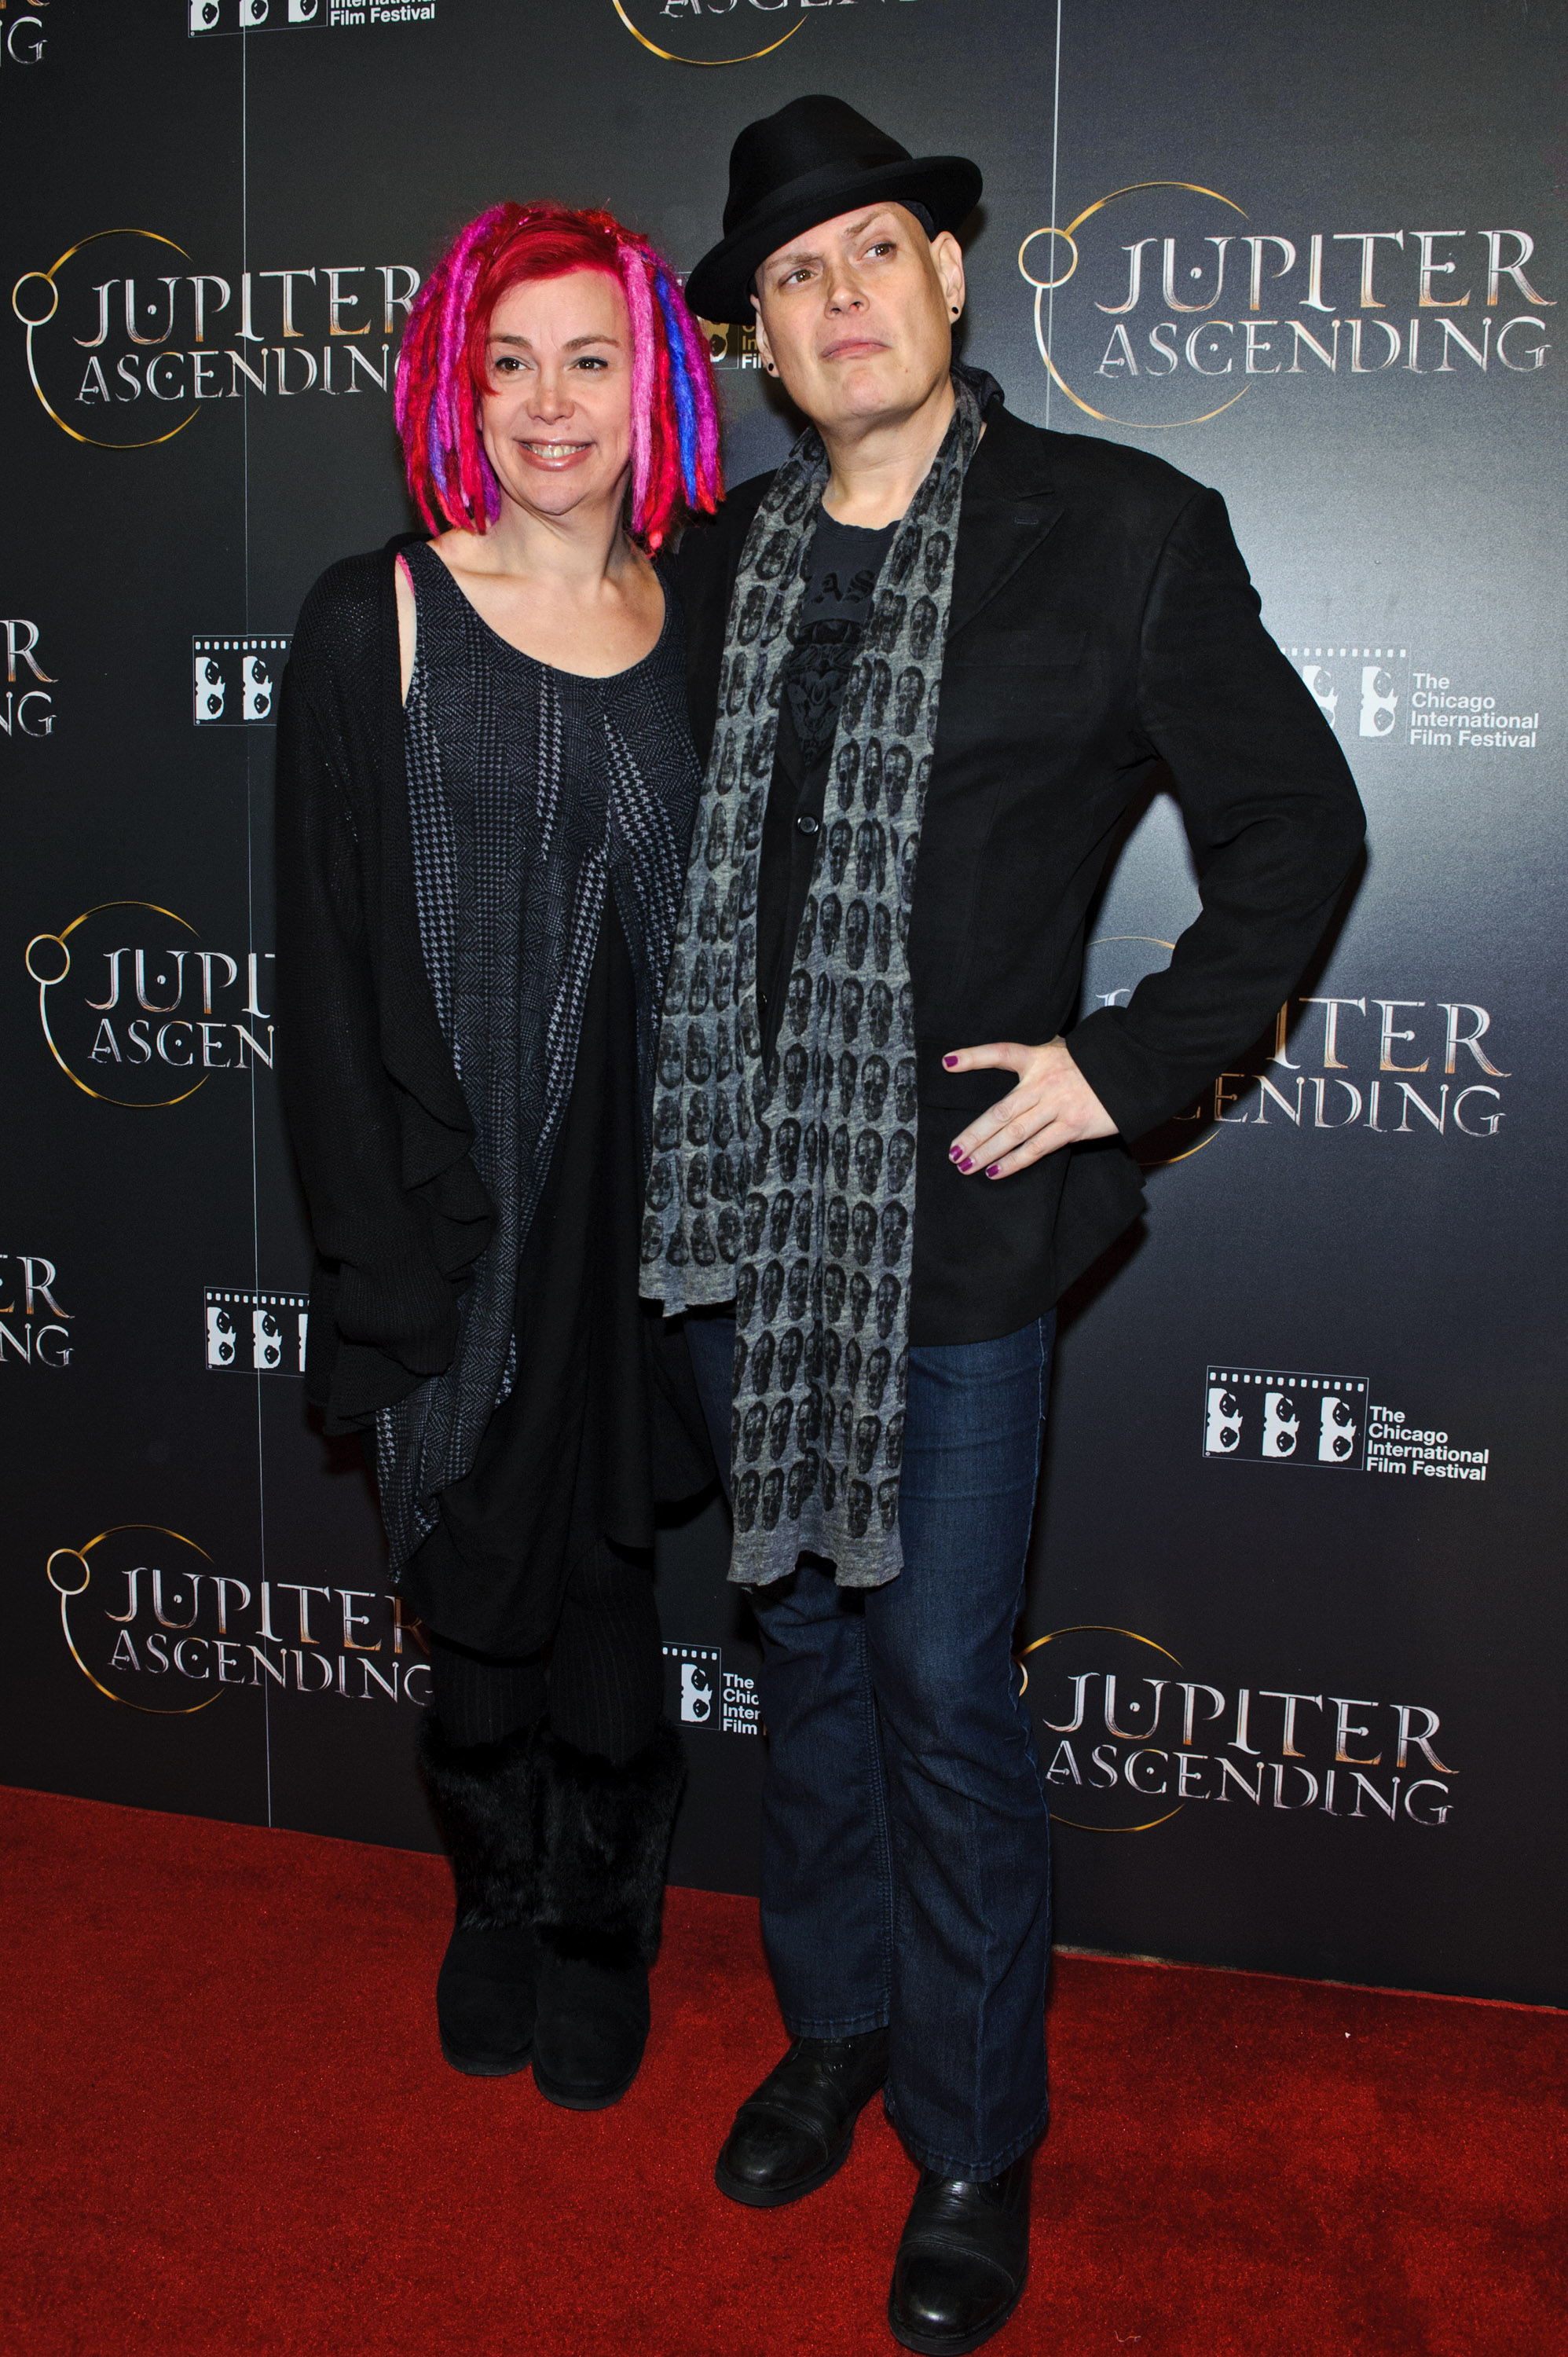 Lana and Lilly Wachowski (formerly known as Larry and Andy) attend a screening of Jupiter Ascending at AMC River East Theater on February 4, 2015, in Chicago, Illinois. | Source: Getty Images